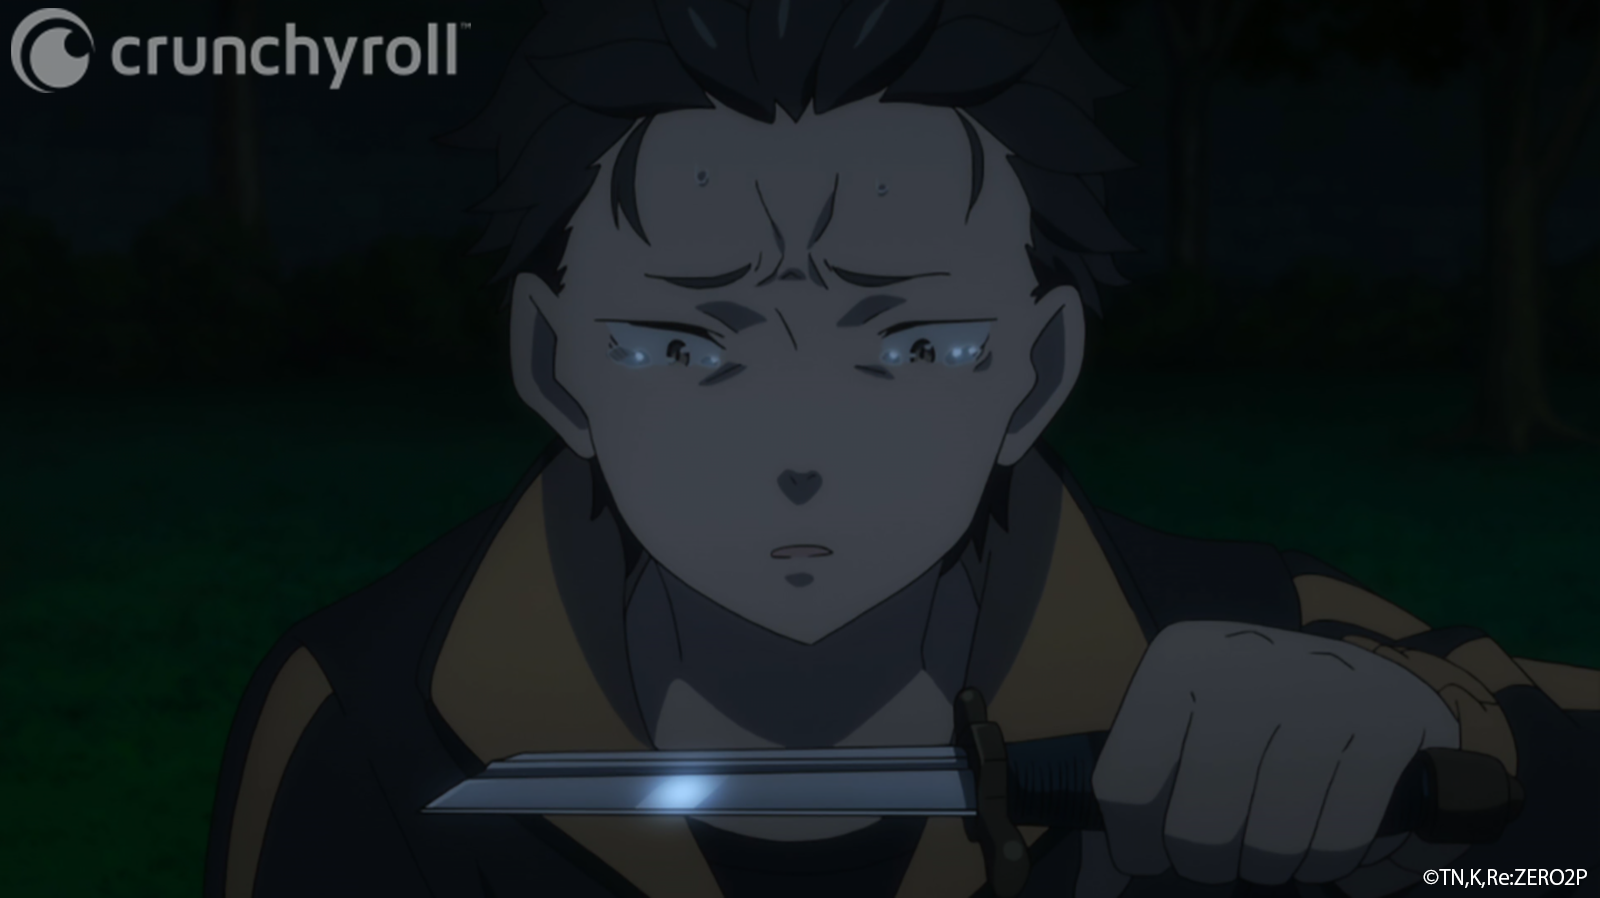 Natsuki Subaru prepares to stab himself in the throat with a broken sword in an effort to reset the timeline in order to save Rem in a scene from the Re: ZERO -Starting Life in Another World- TV anime.